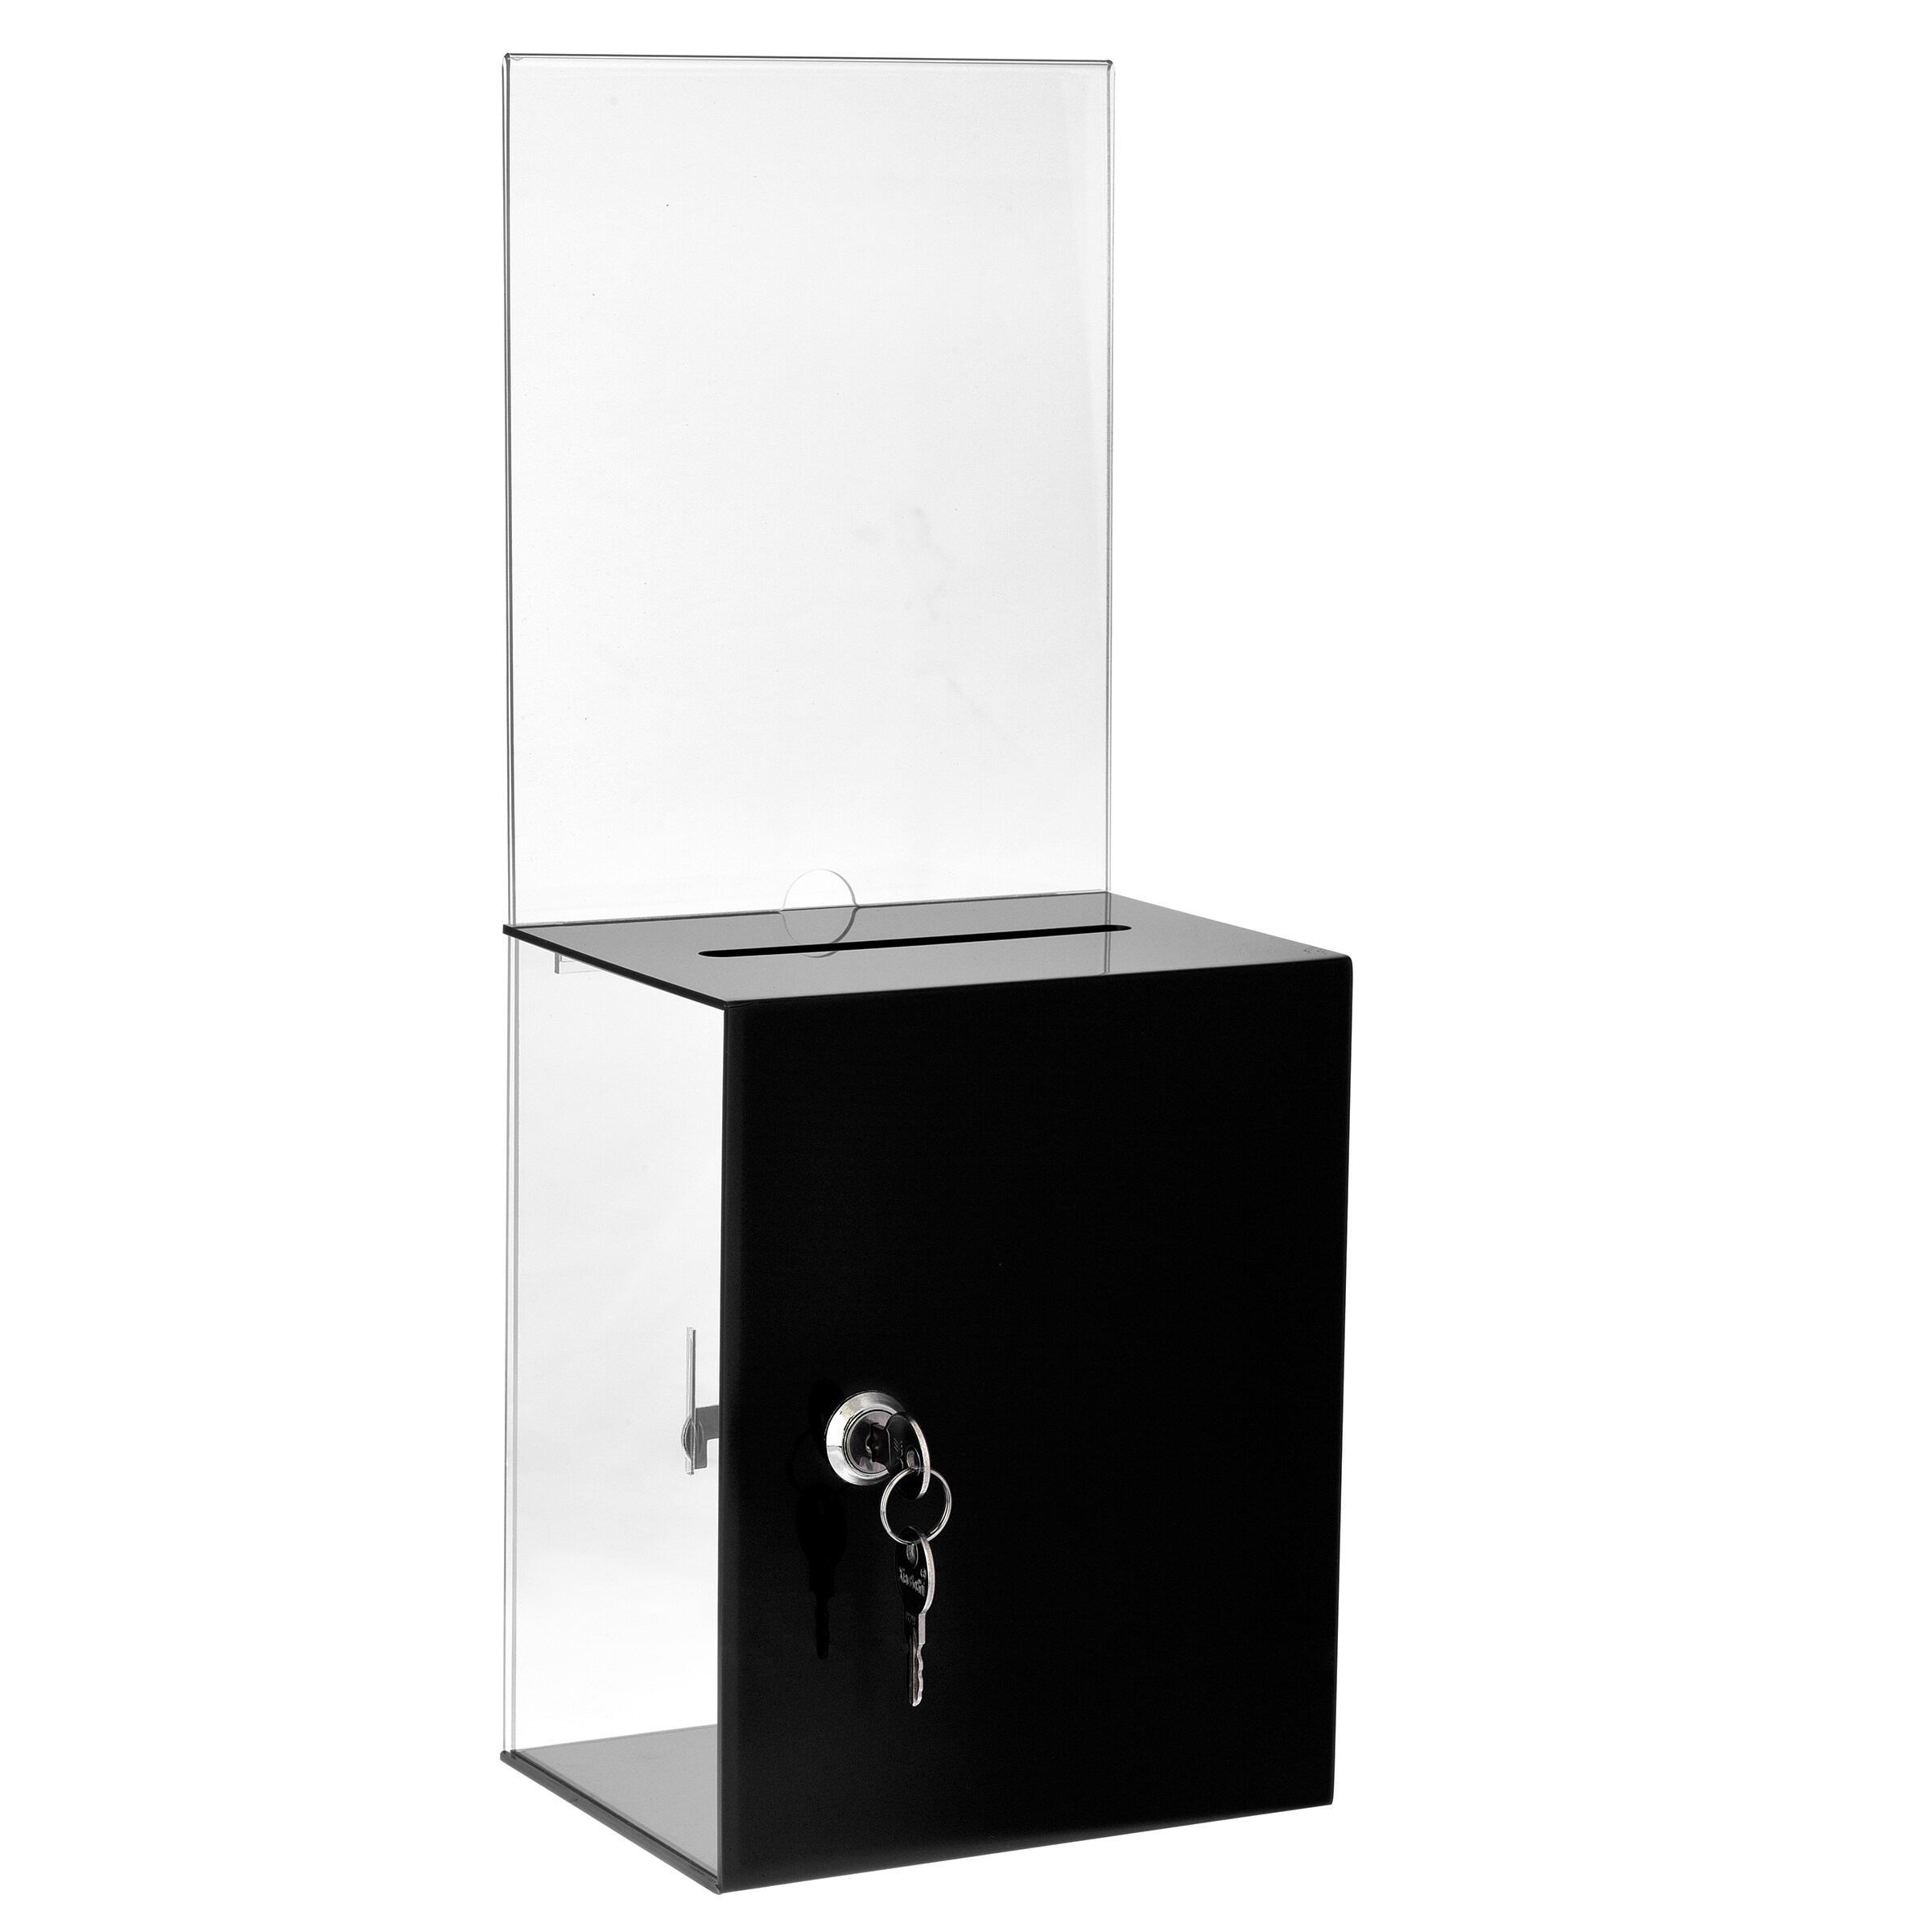 Easy Wall Mounting or Counter Top Use Black Metal Donation Box & Collection Box Office Suggestion Box Secure Box with Top Coin Slot and Lock Included with 2 Keys 